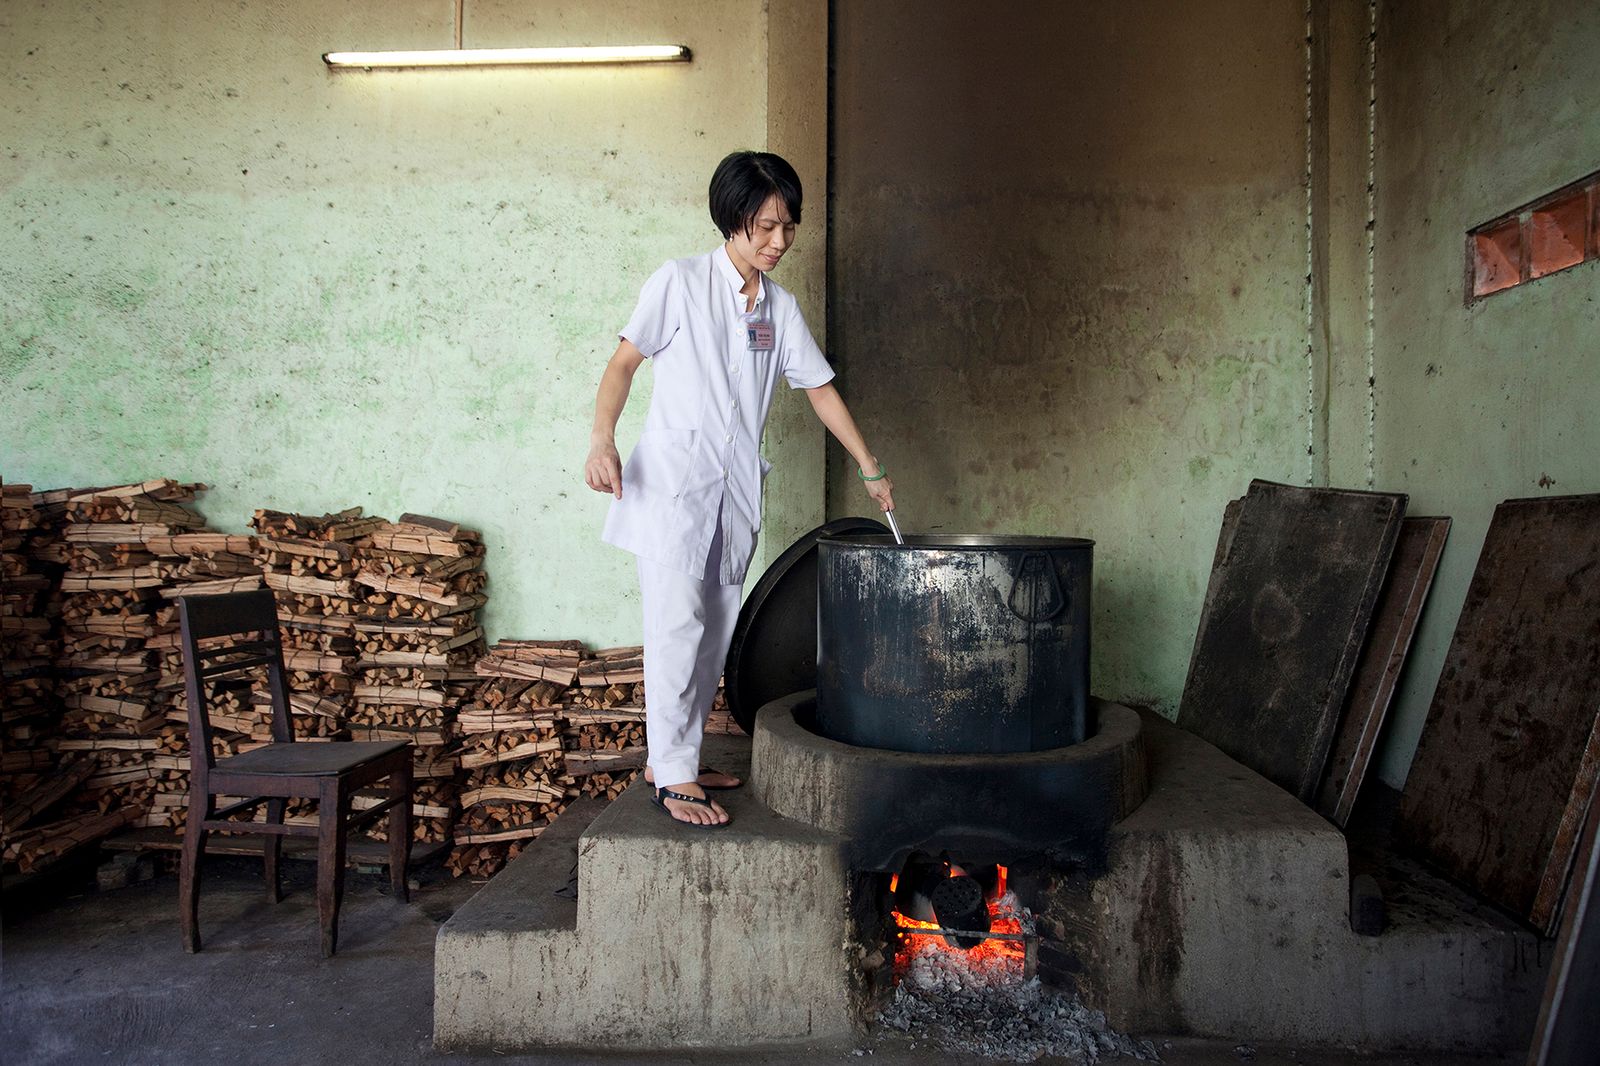 © Astrid Schulz - Image from the 100 Faces of Vietnam photography project